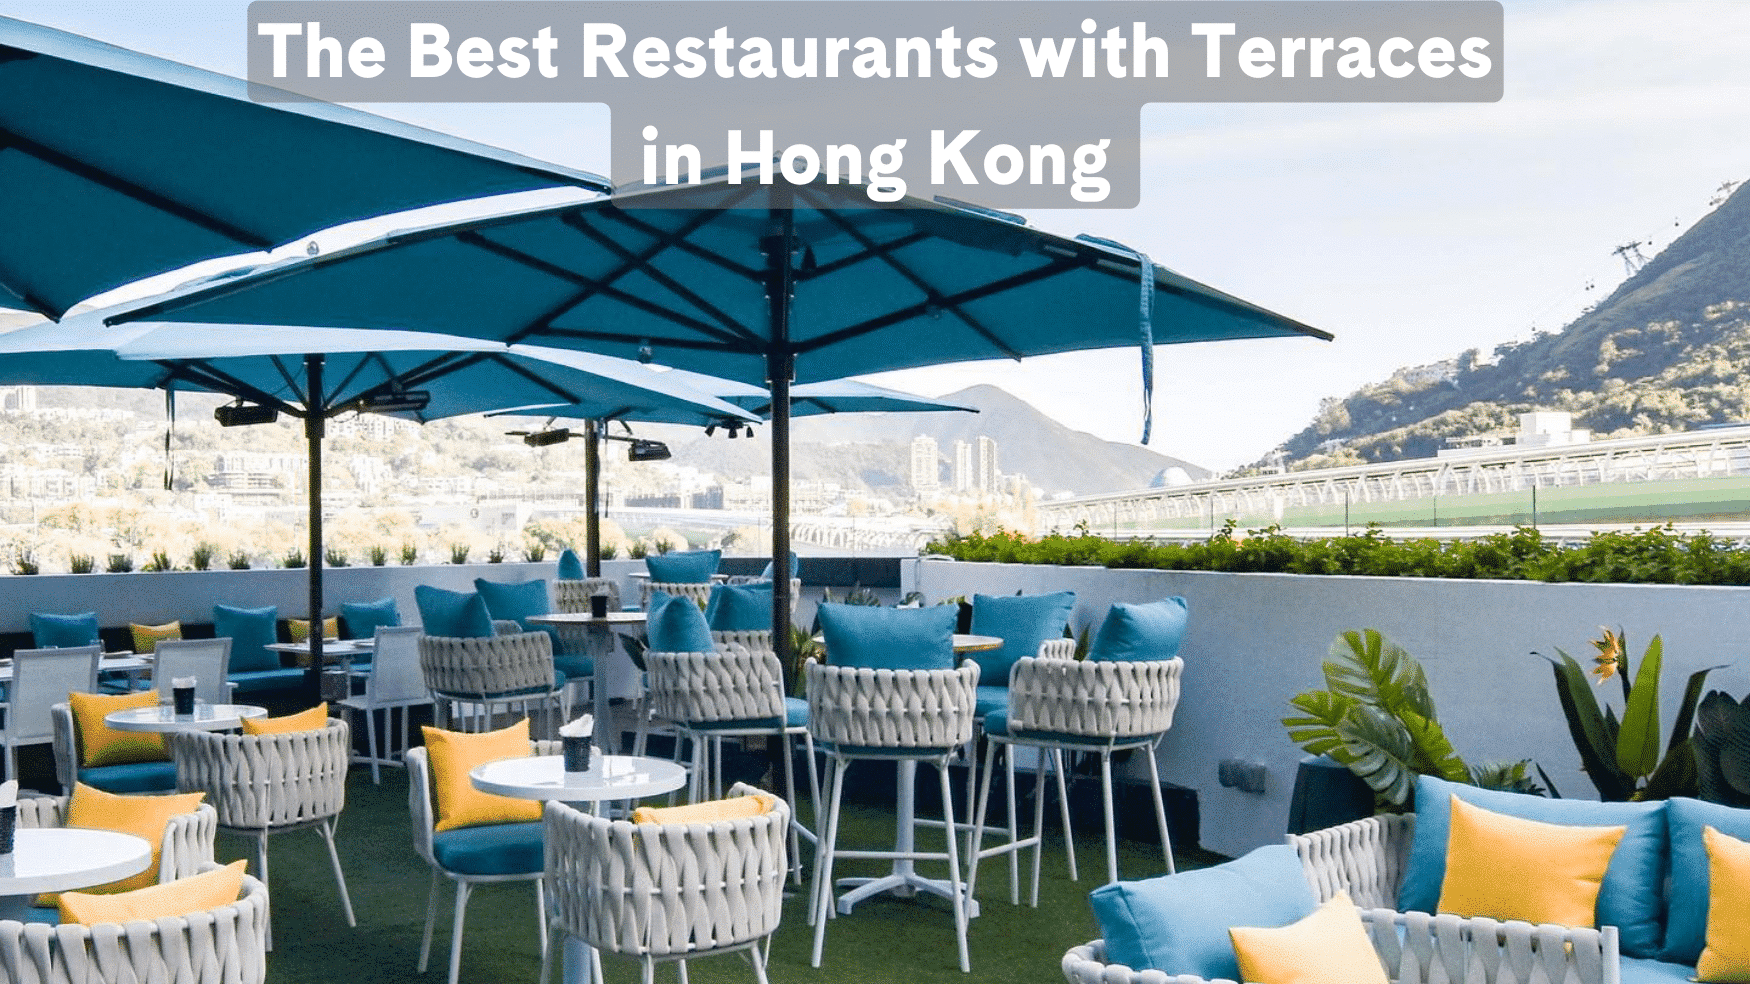 The Best Restaurants with Terraces in Hong Kong